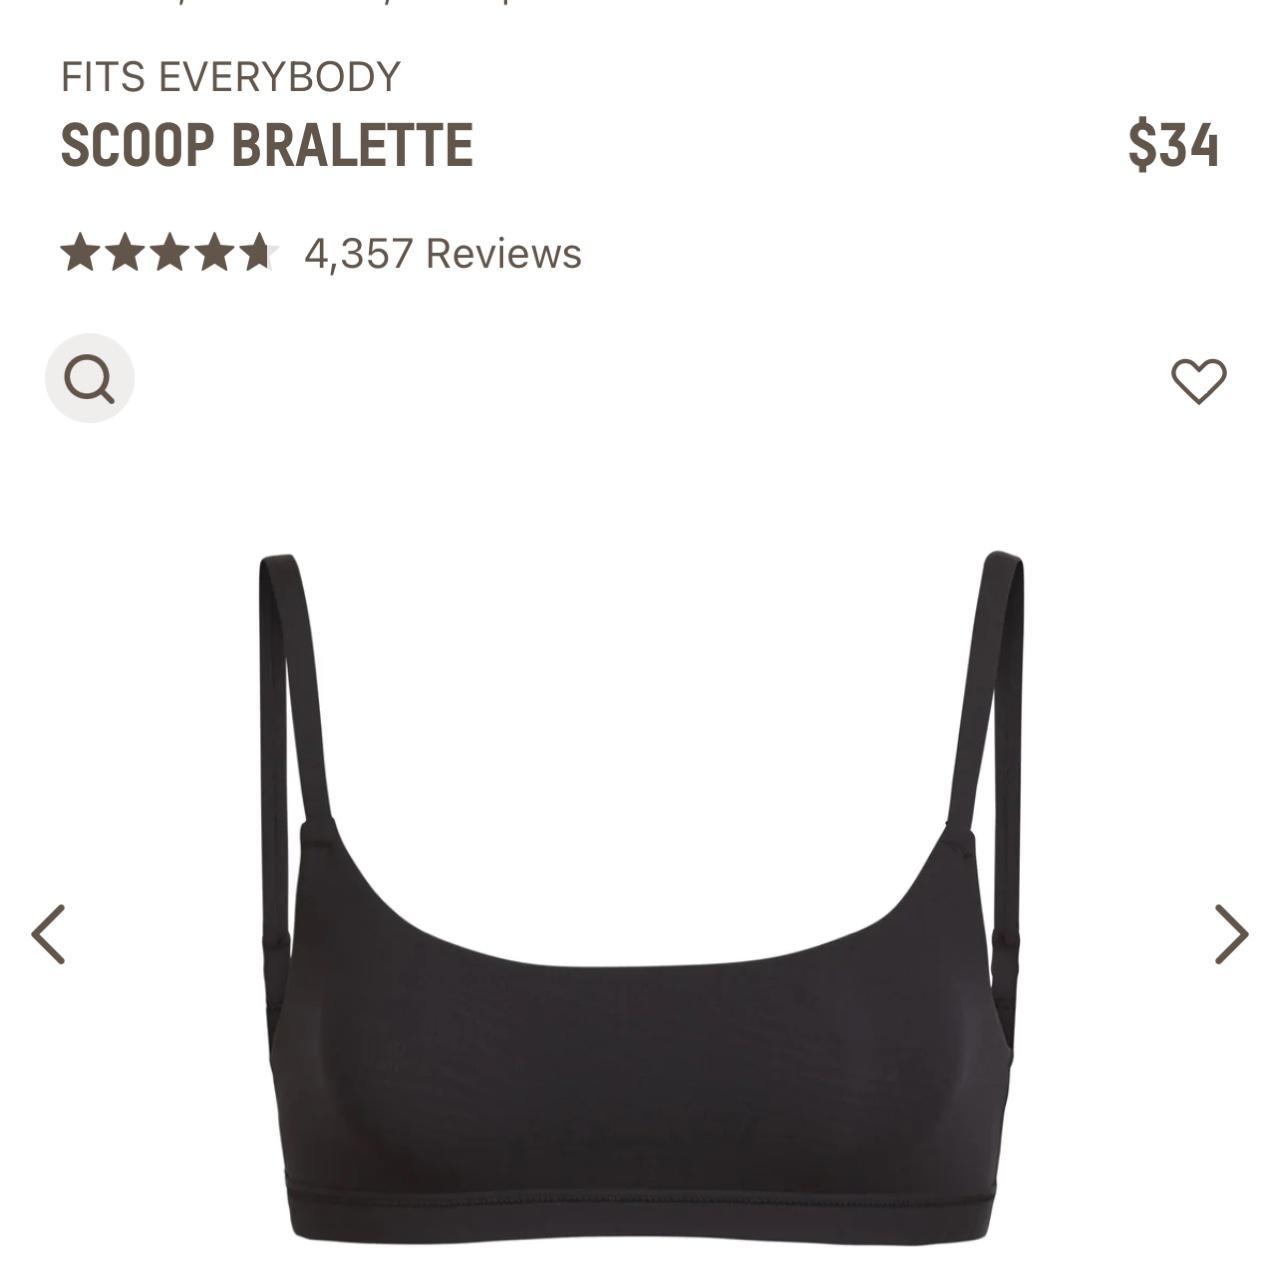 skims scoop bralette size 2x but could also fit an - Depop